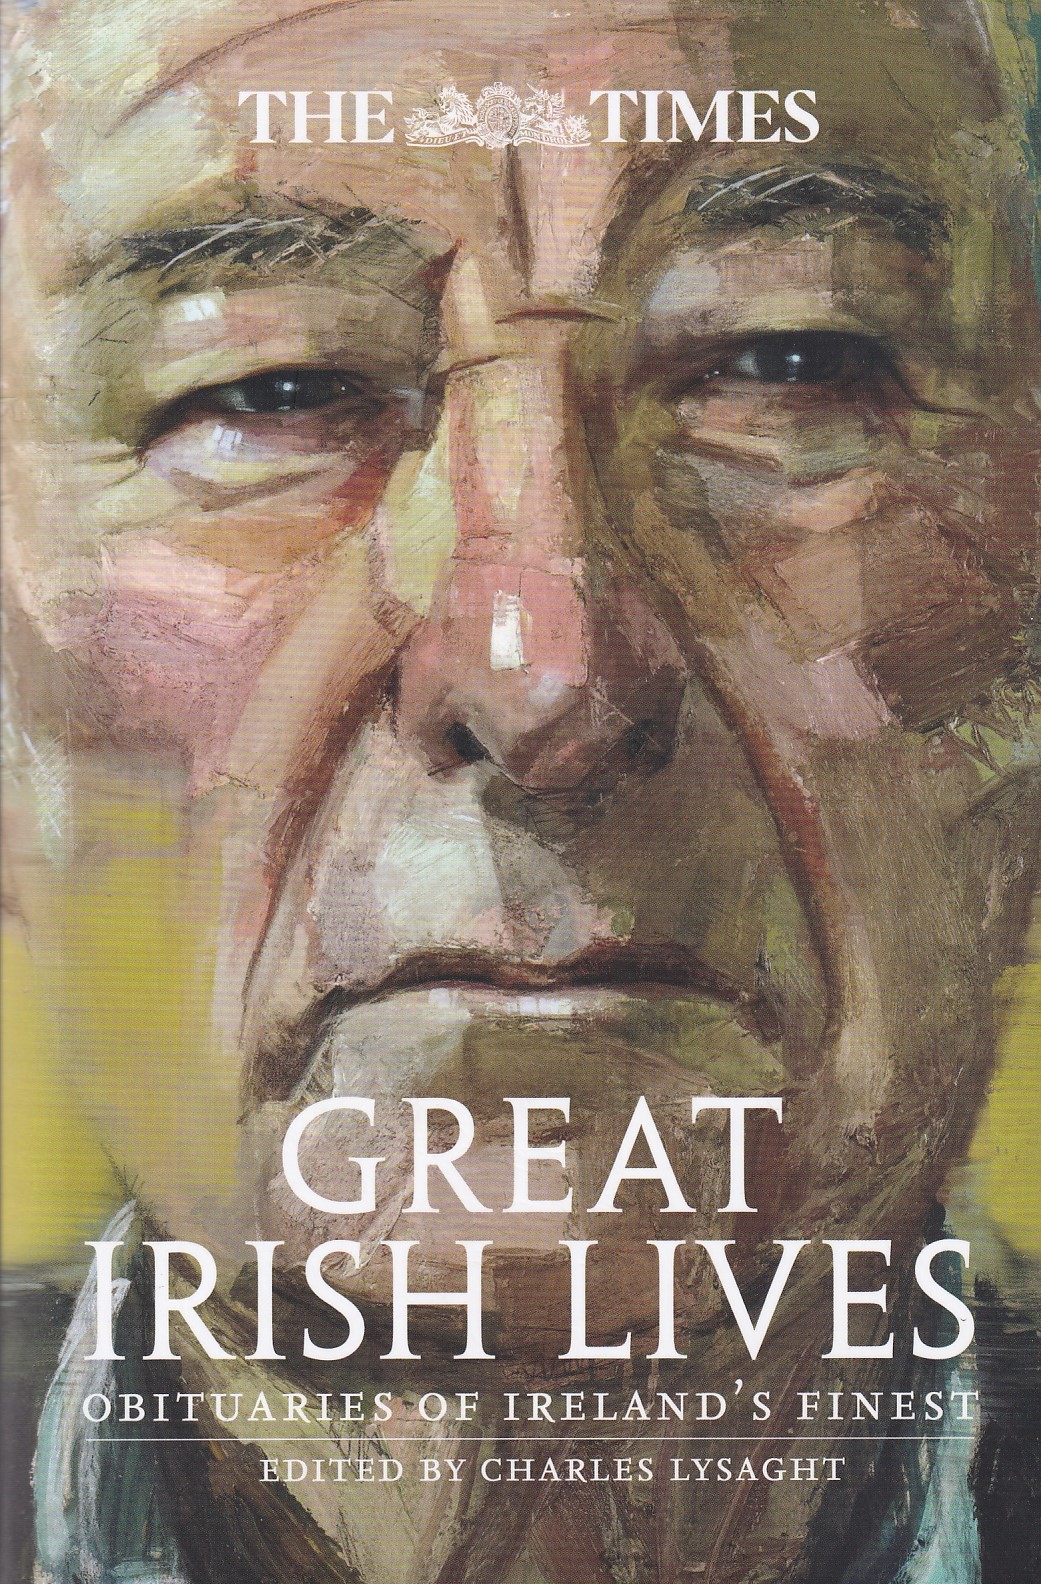 Great Irish Lives. The Times by Lysaght, Charles ed (The Times)